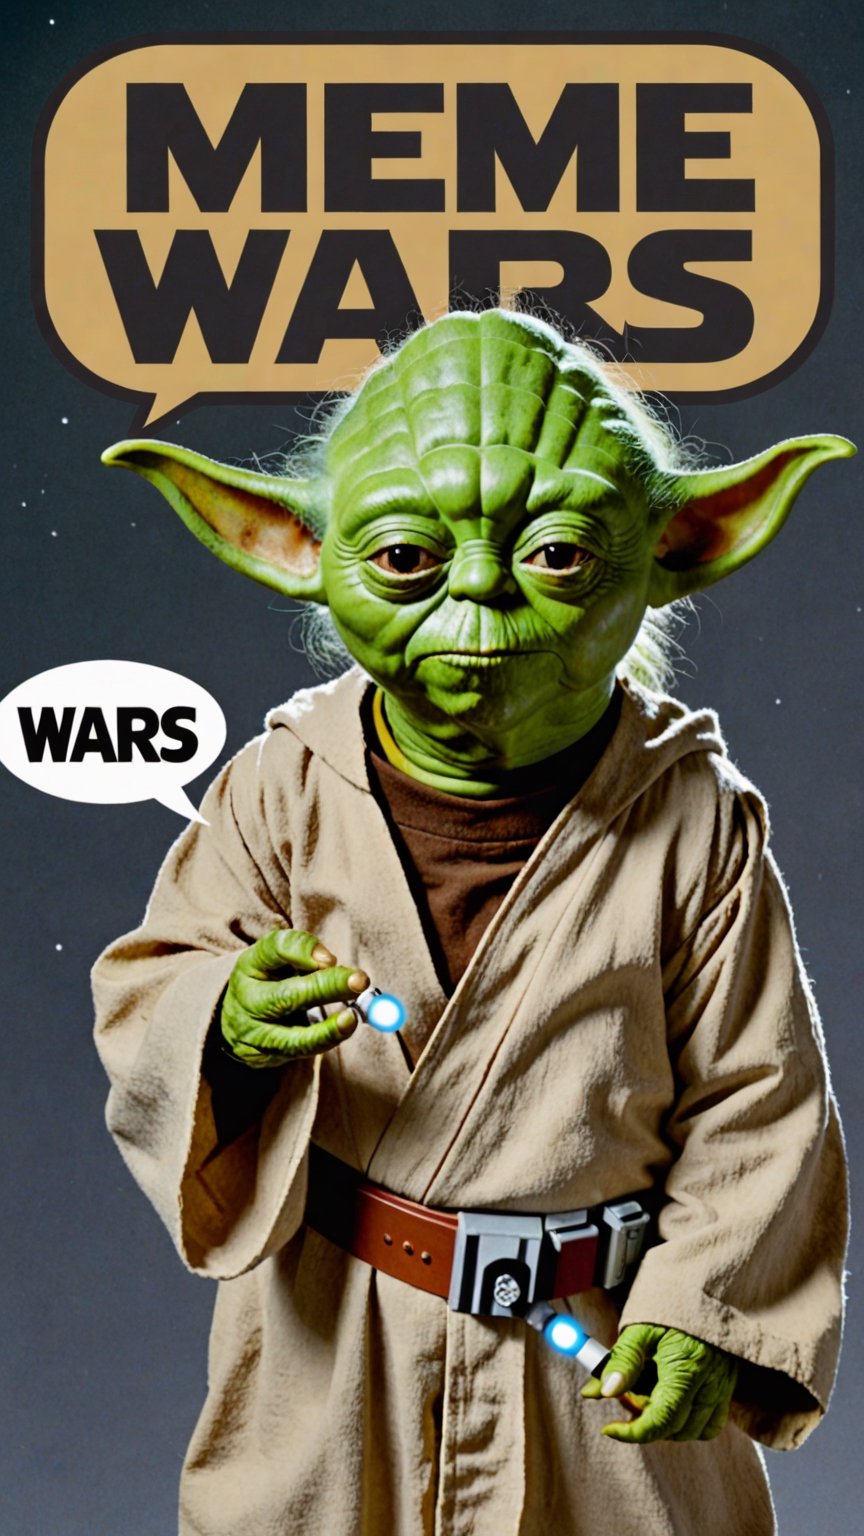 Photo of Yoda with text bubble that says "meme wars" 